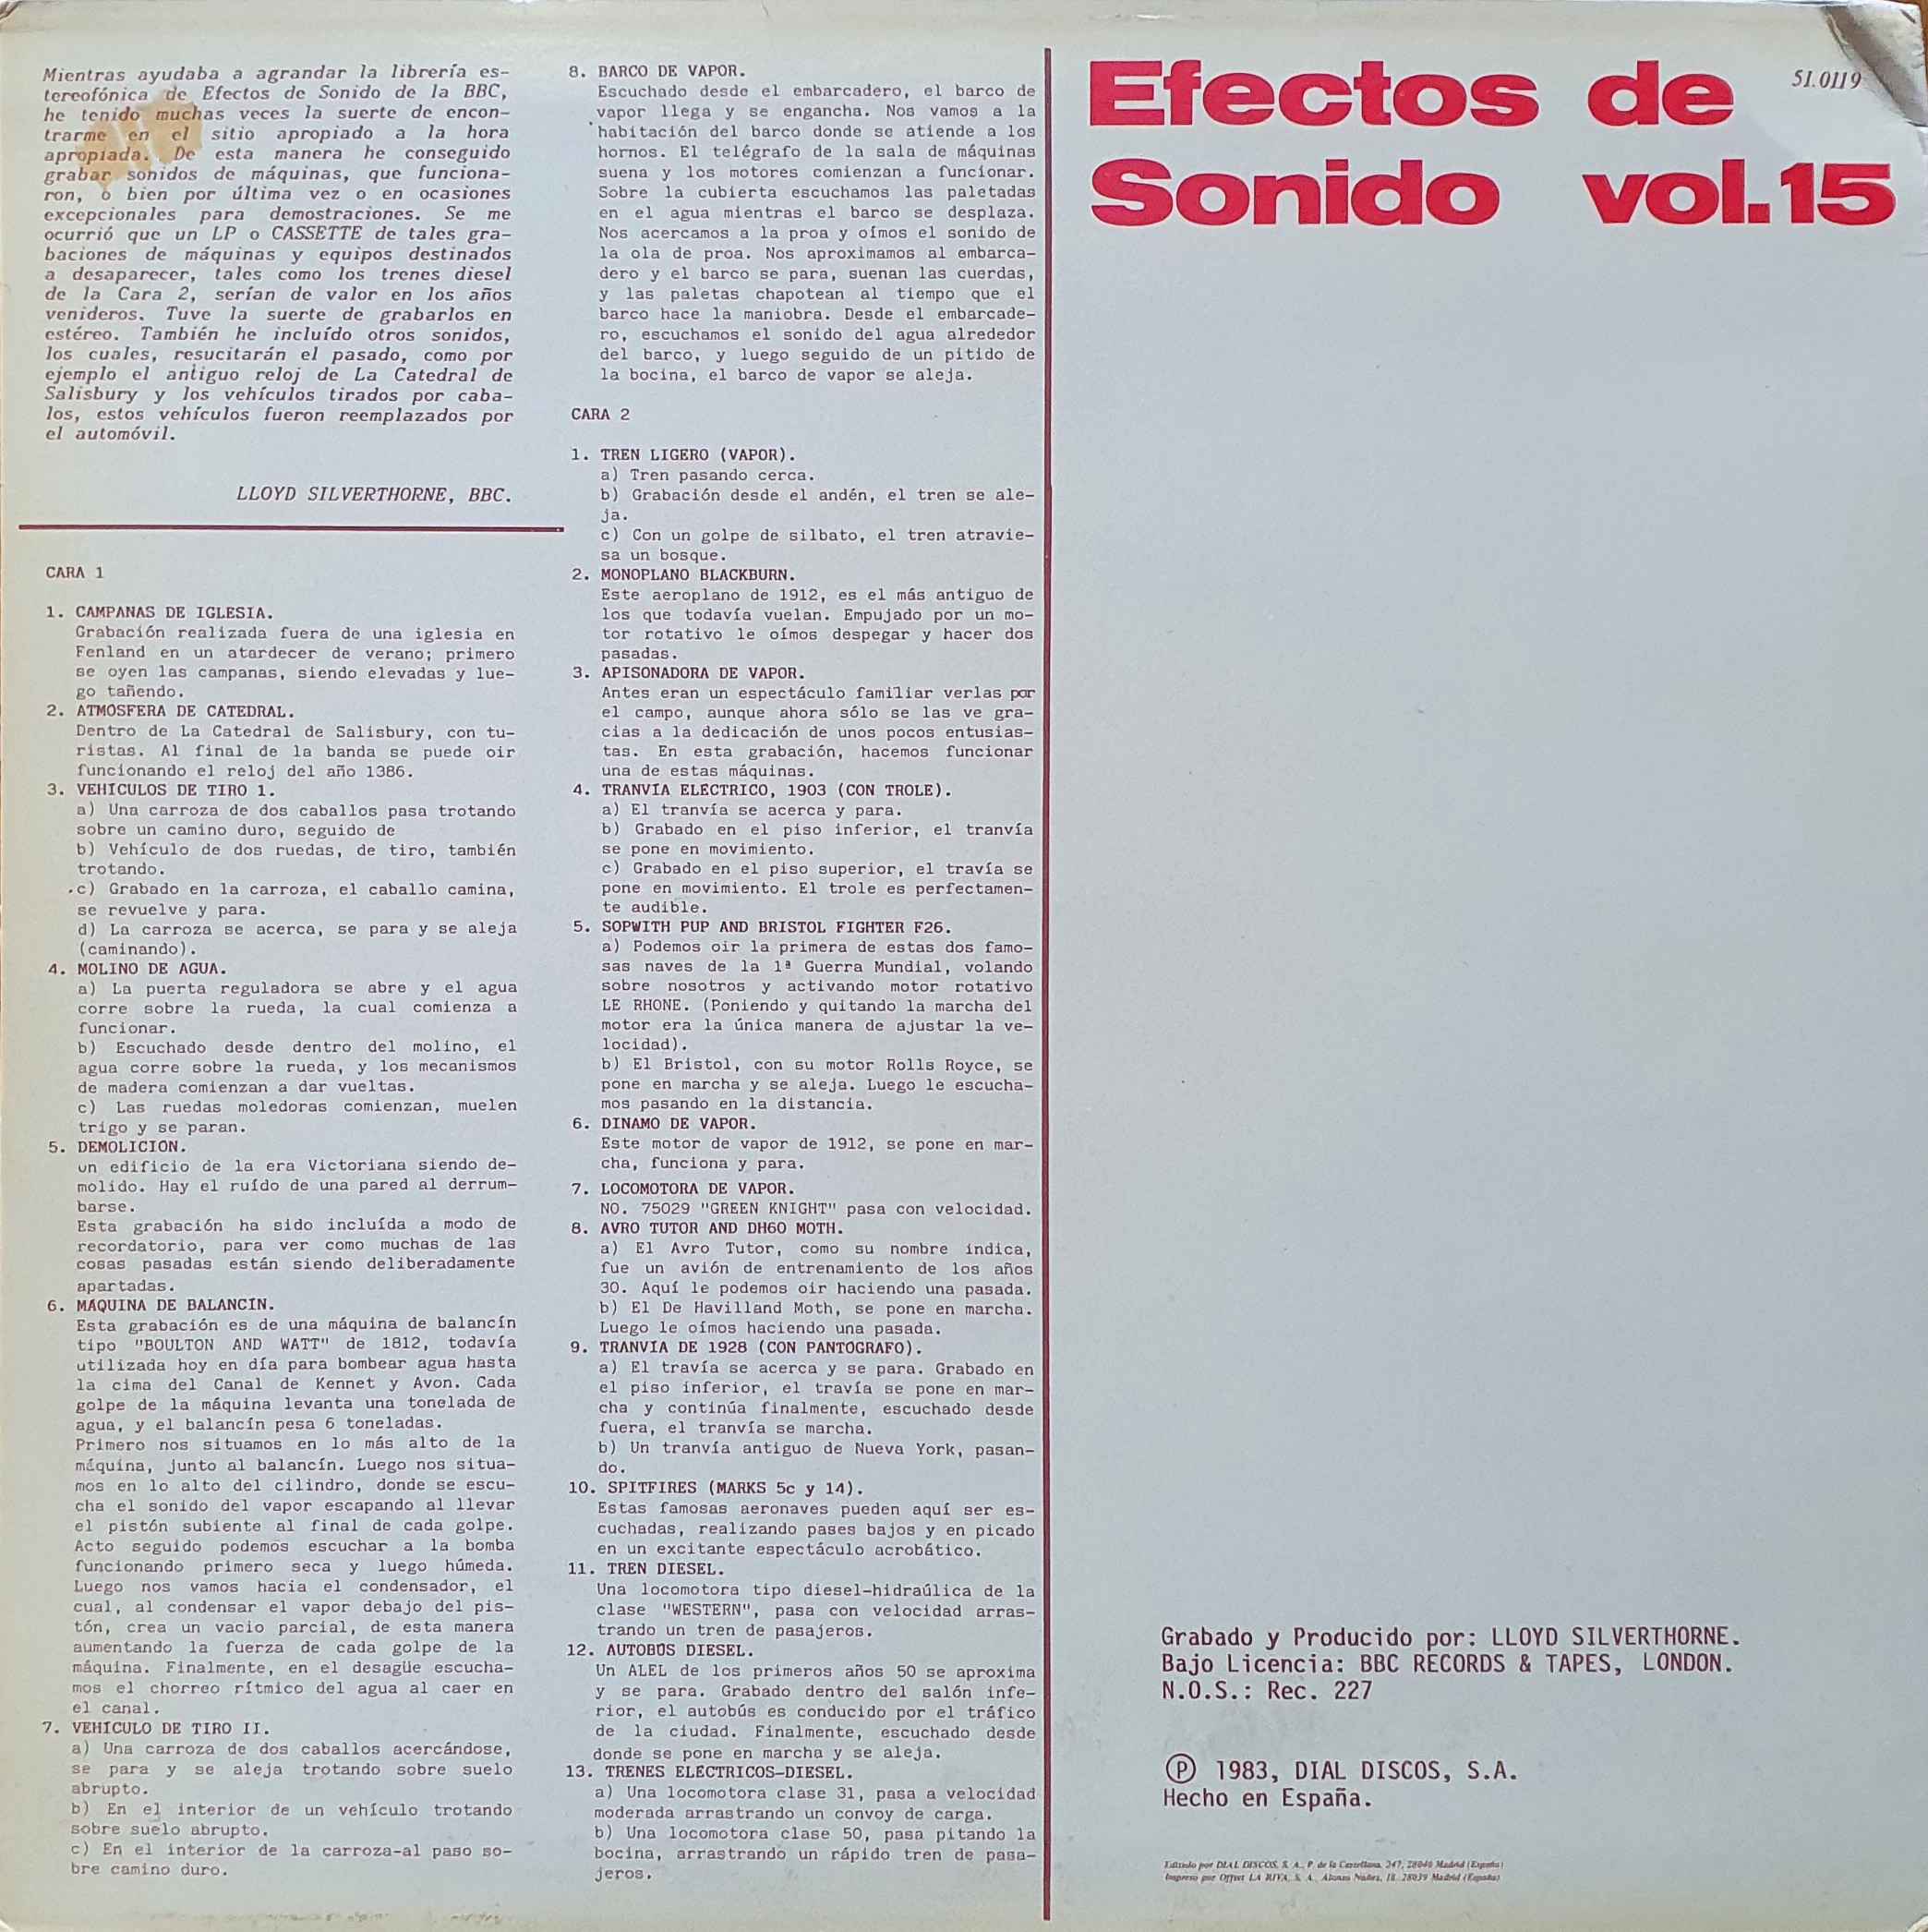 Picture of 51.0119 Efectos de sonido Vol. 15 by artist Various from the BBC records and Tapes library